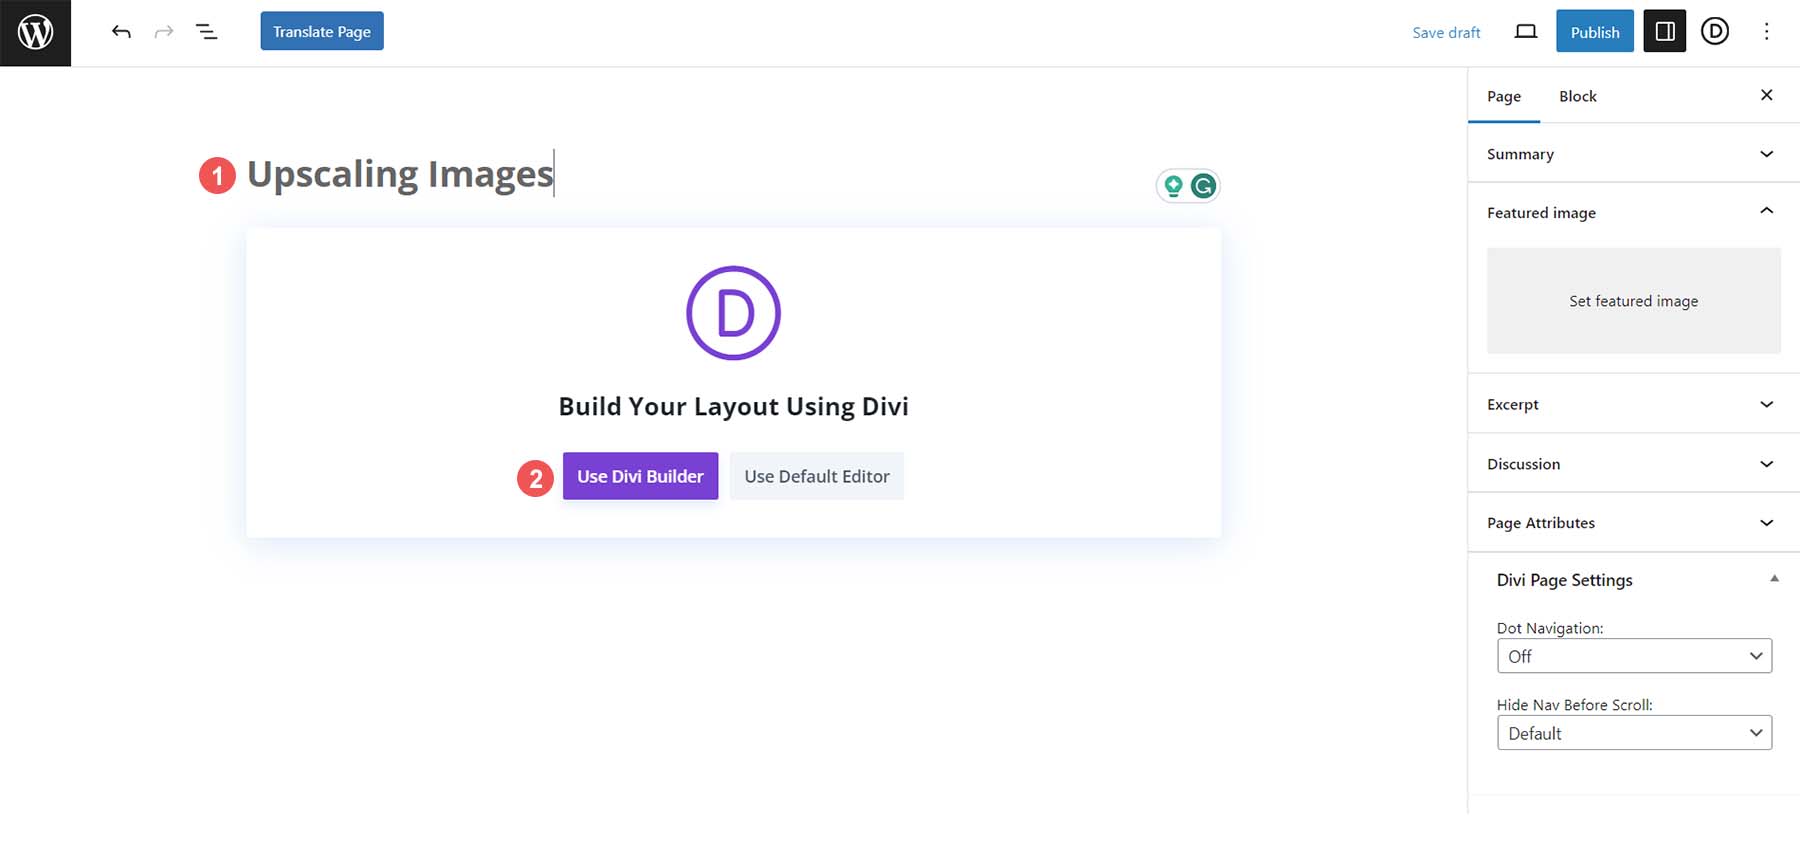 Setting up a new page to upscale images with Divi AI